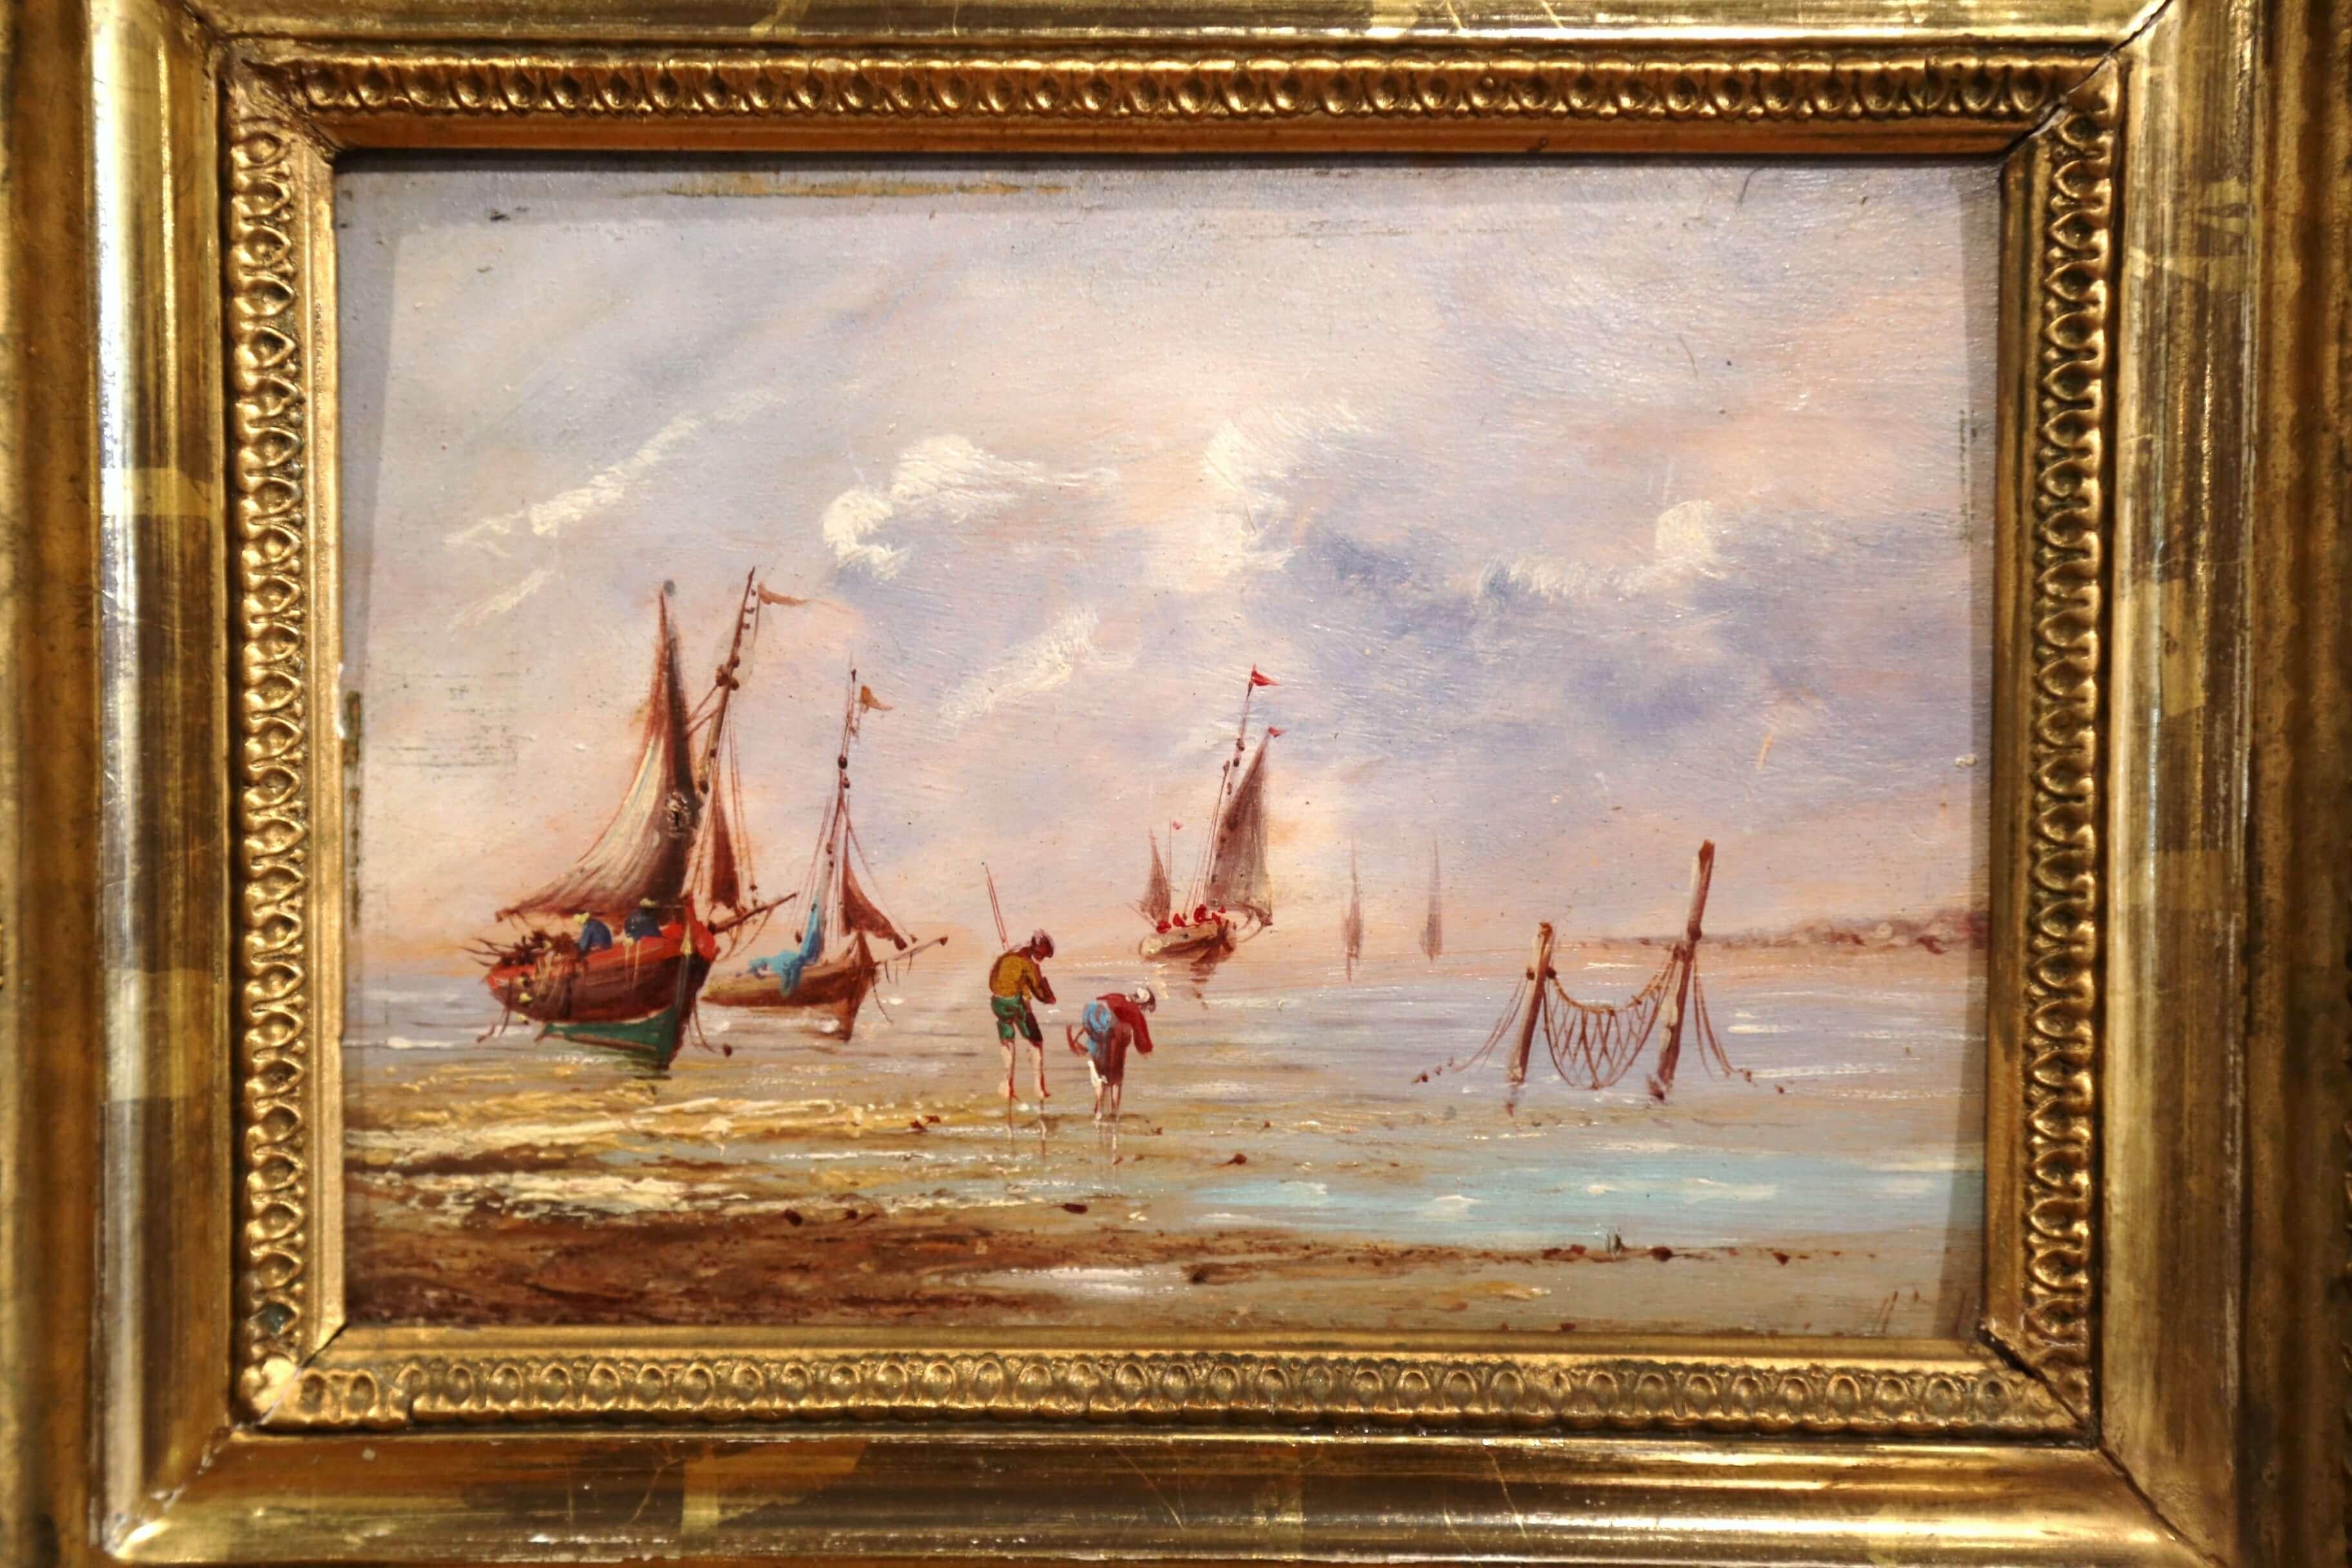 Set in the original carved gilt frame, this small oil painting on board was created in France, circa 1860; it features a typical fishing scene on the Brittany coast, with two people picking shellfish and sailboats in the background. The painting is